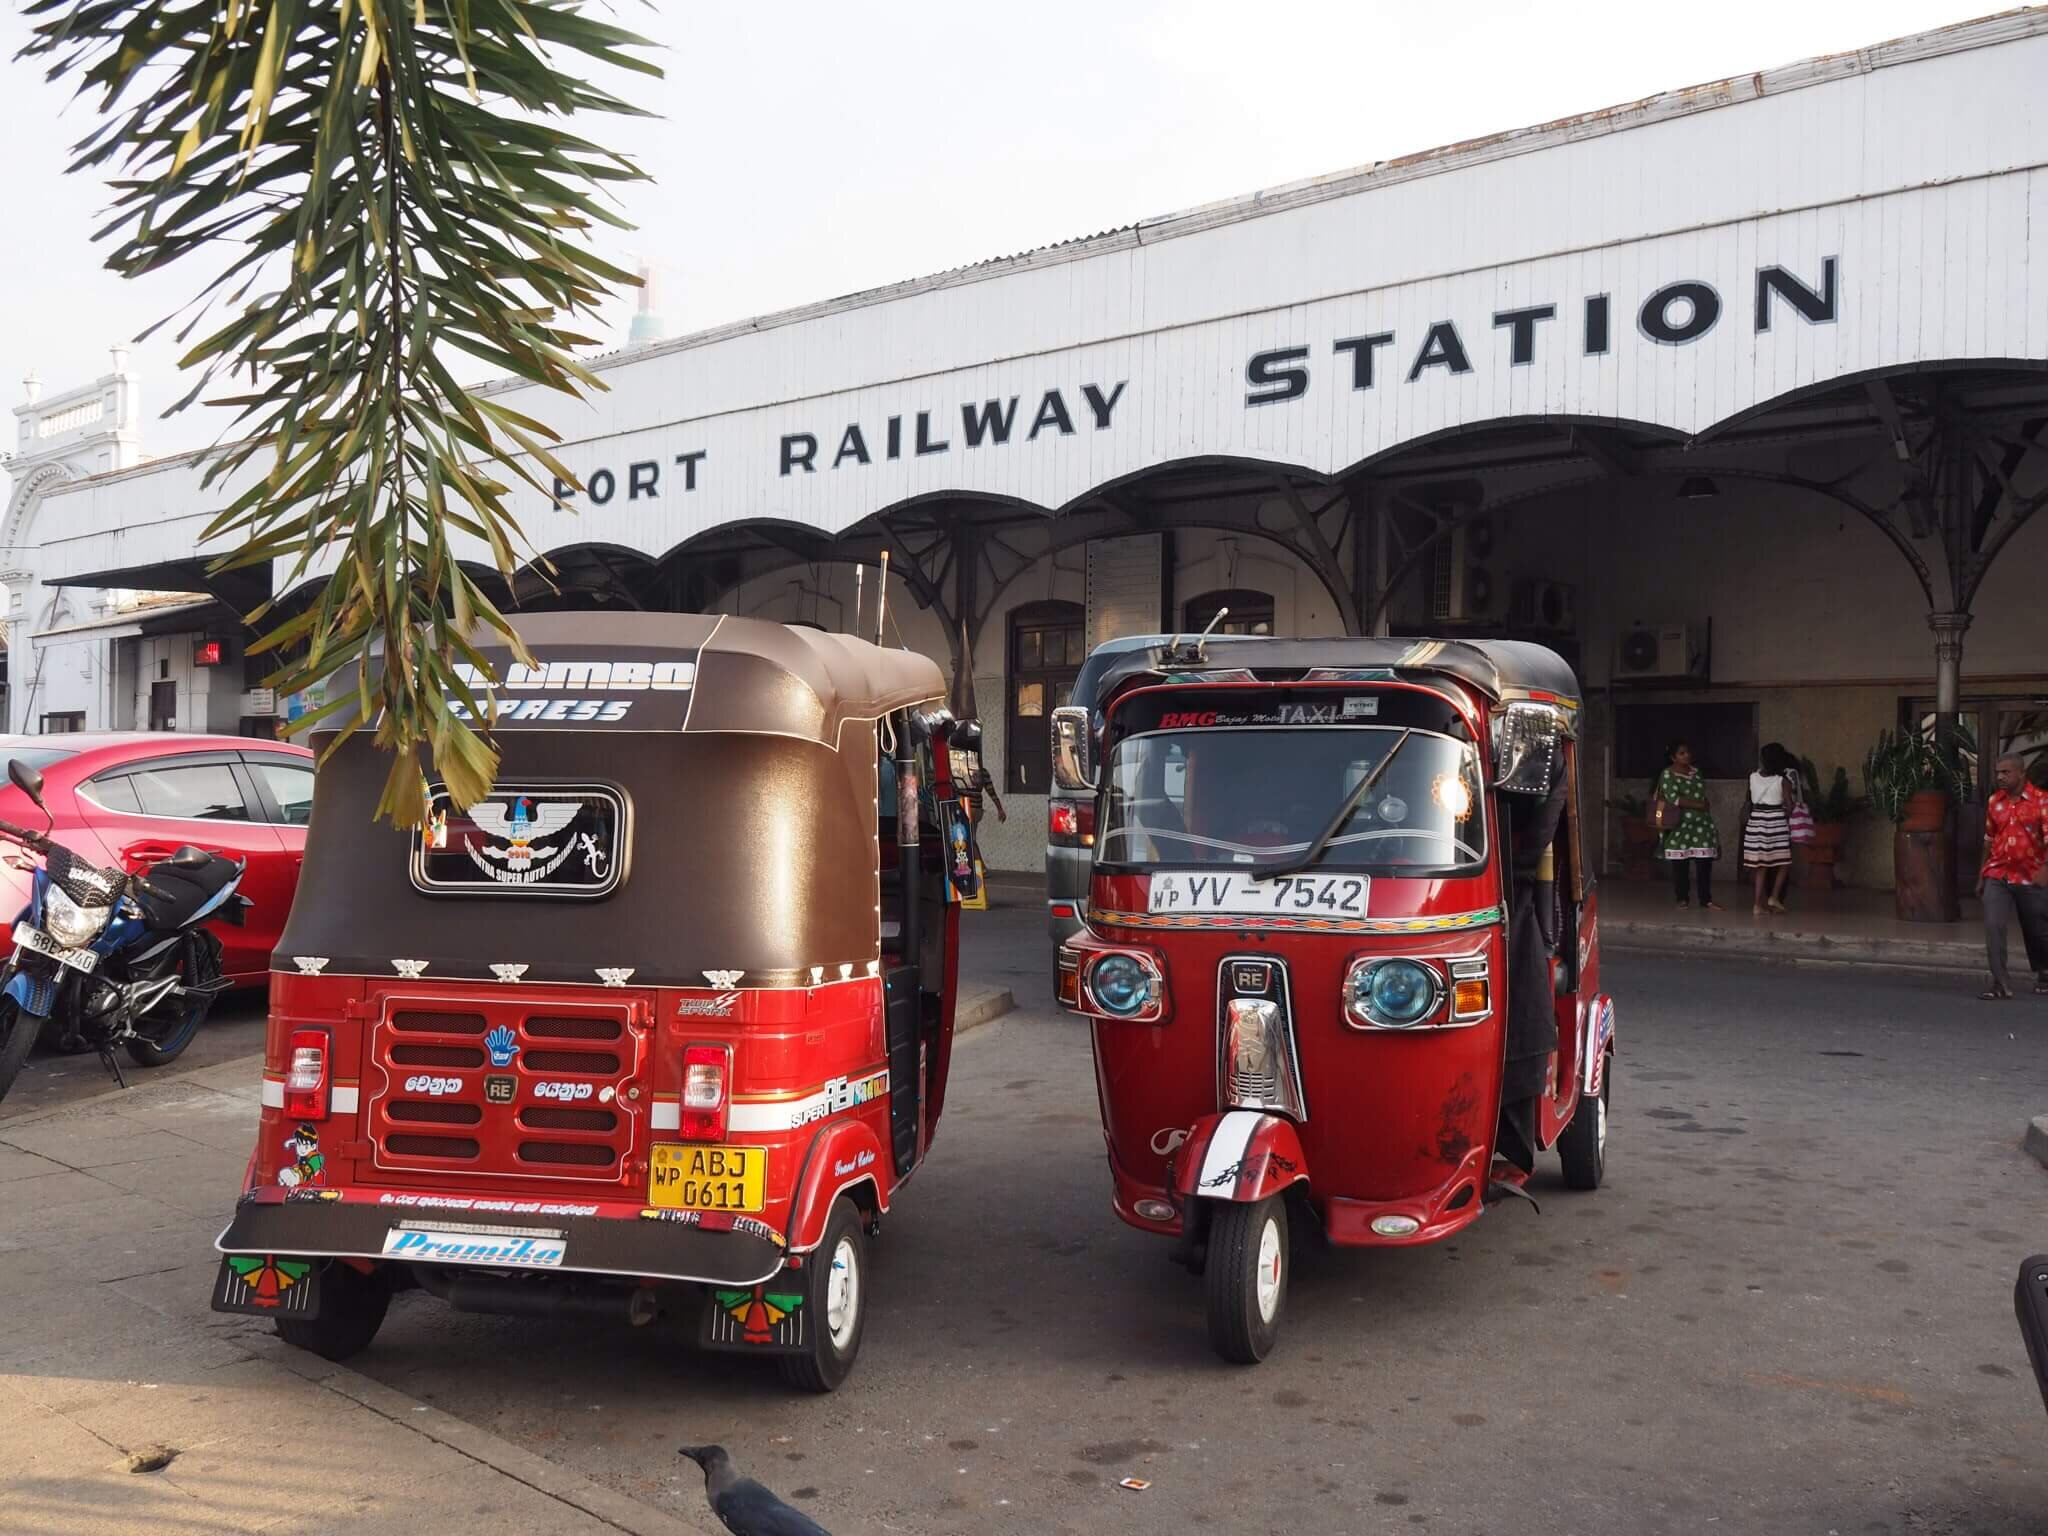  When it’s time to leave, head to Fort Railway Station… 